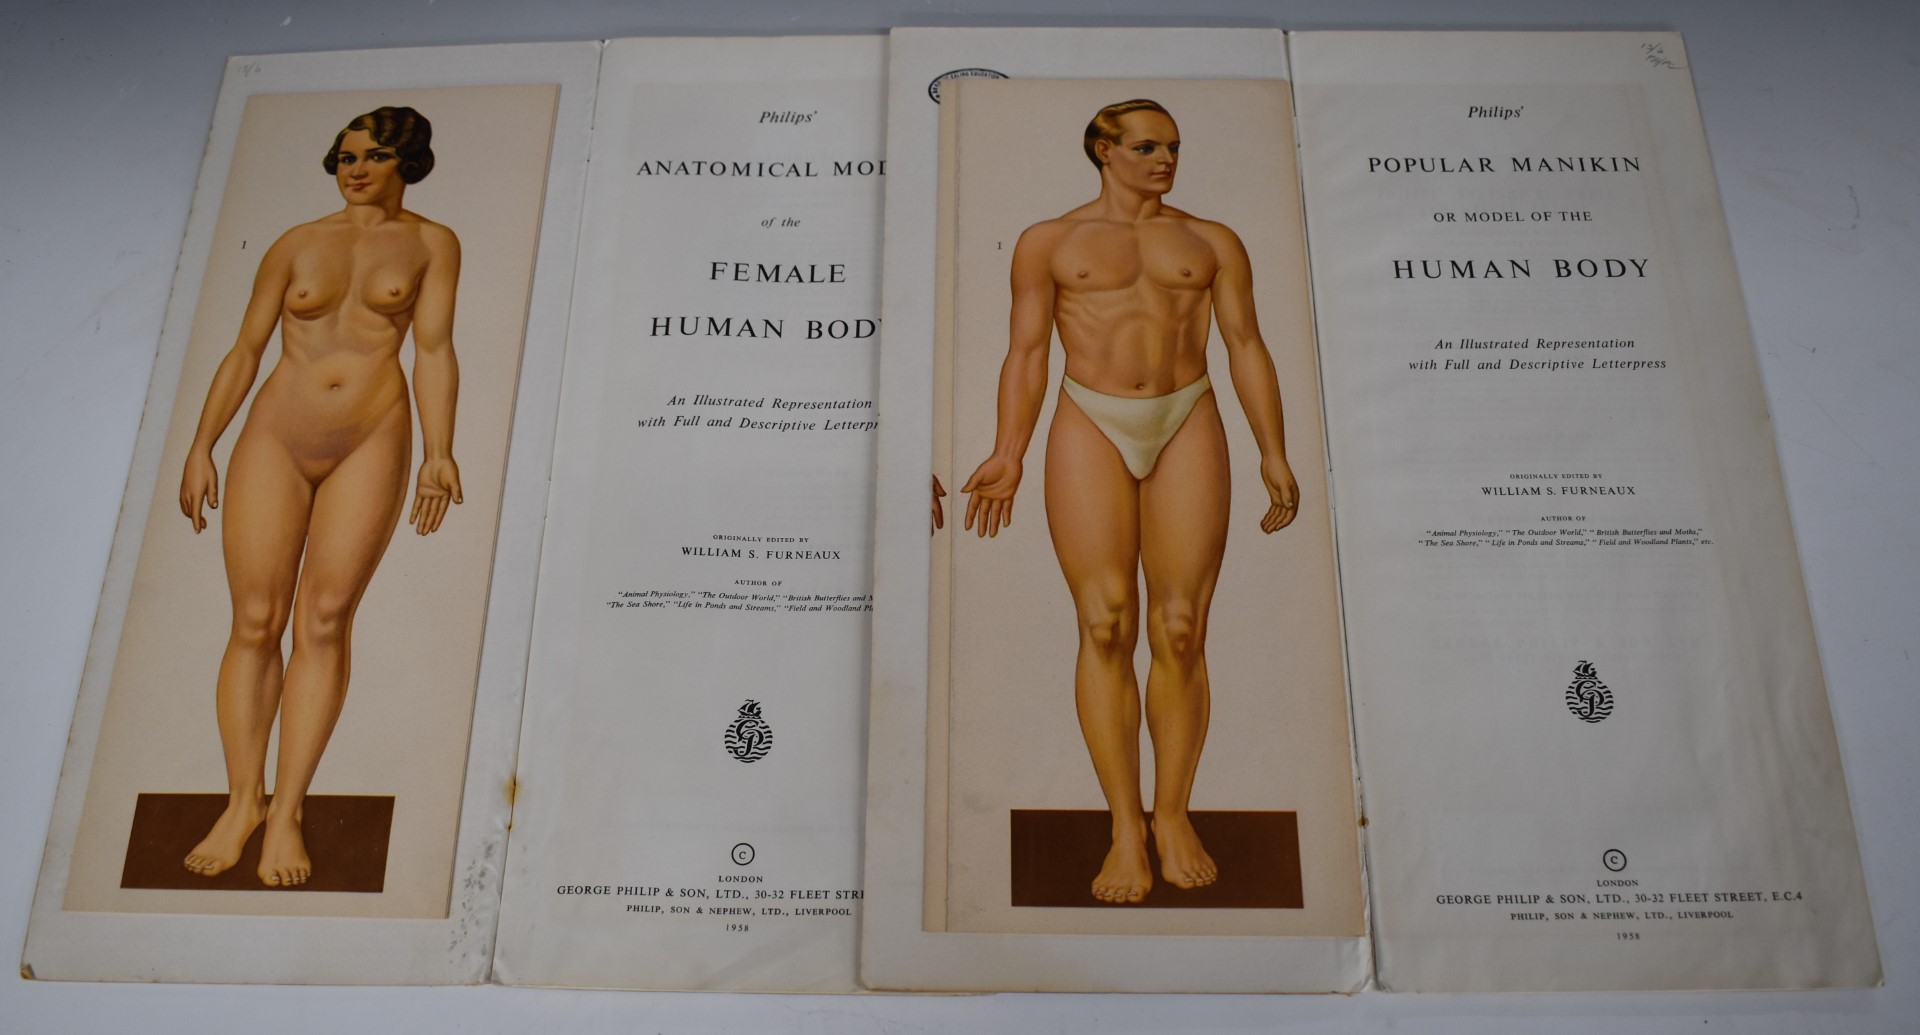 Philip's Anatomical Model of the Human Body, originally edited by William S Furneaux, together - Image 2 of 3